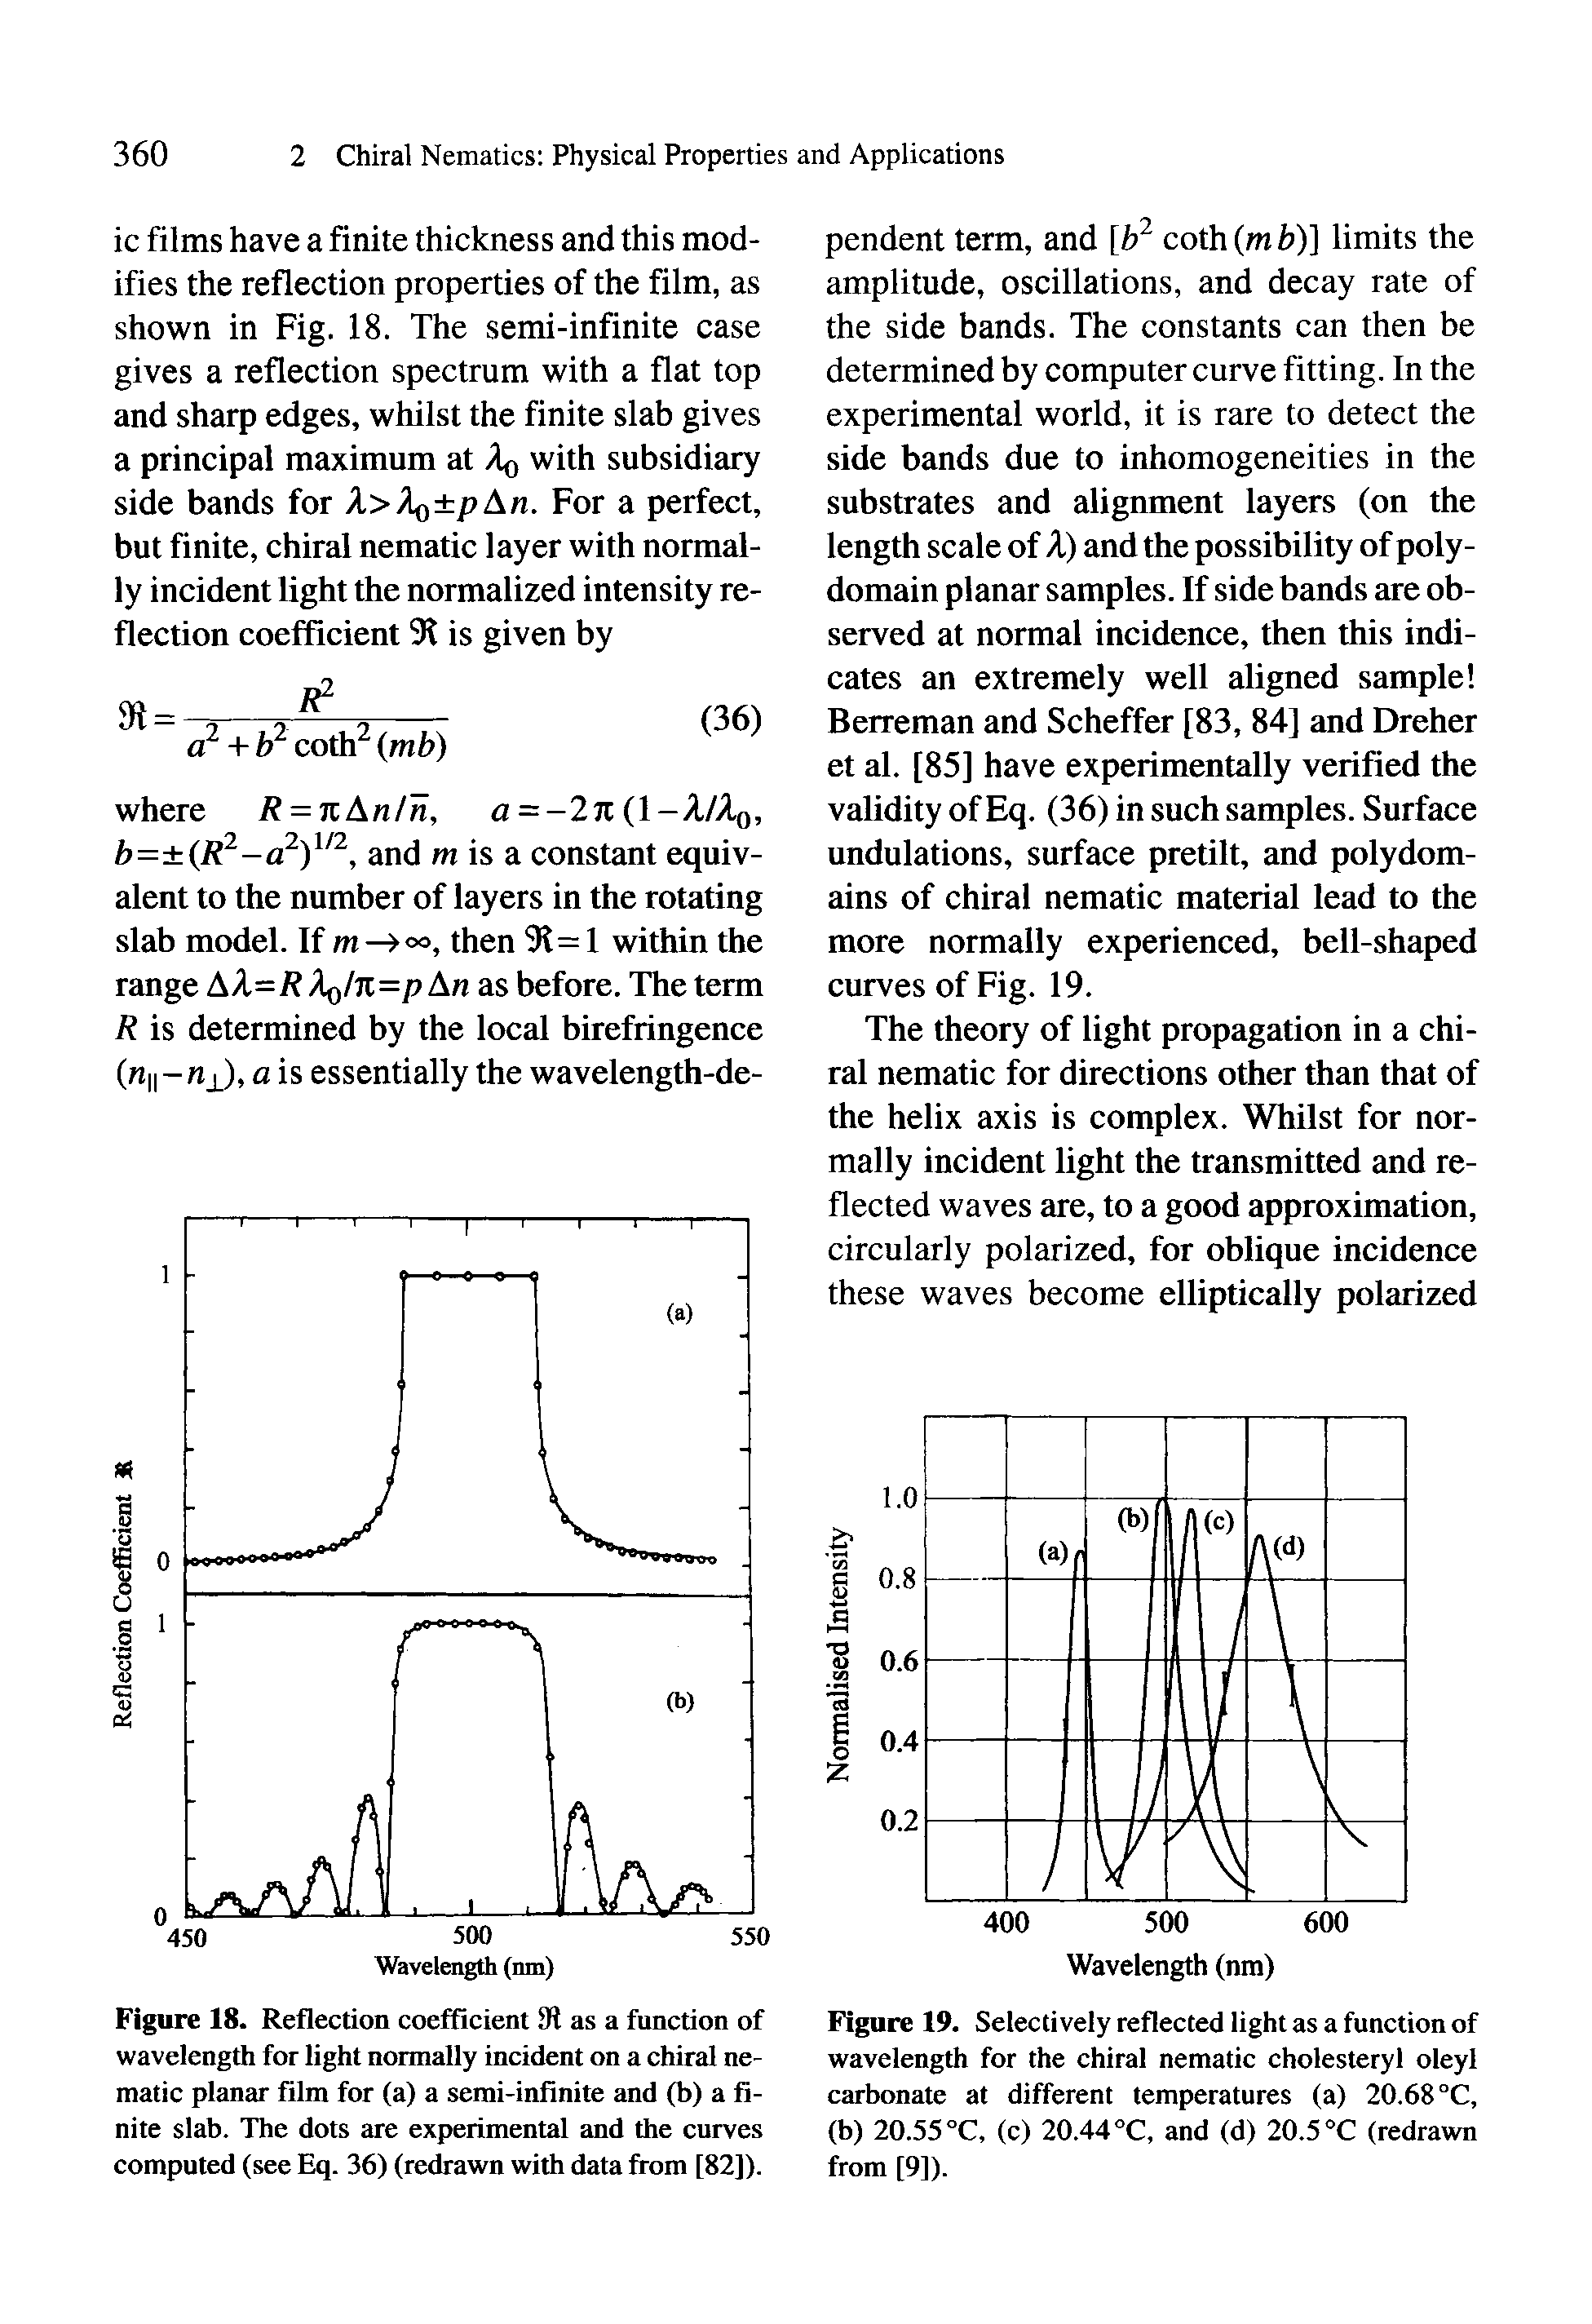 Figure 19. Selectively reflected light as a function of wavelength for the chiral nematic cholesteryl oleyl carbonate at different temperatures (a) 20.68 °C, (b) 20.55 °C, (c) 20.44 °C, and (d) 20.5 °C (redrawm from [9]).